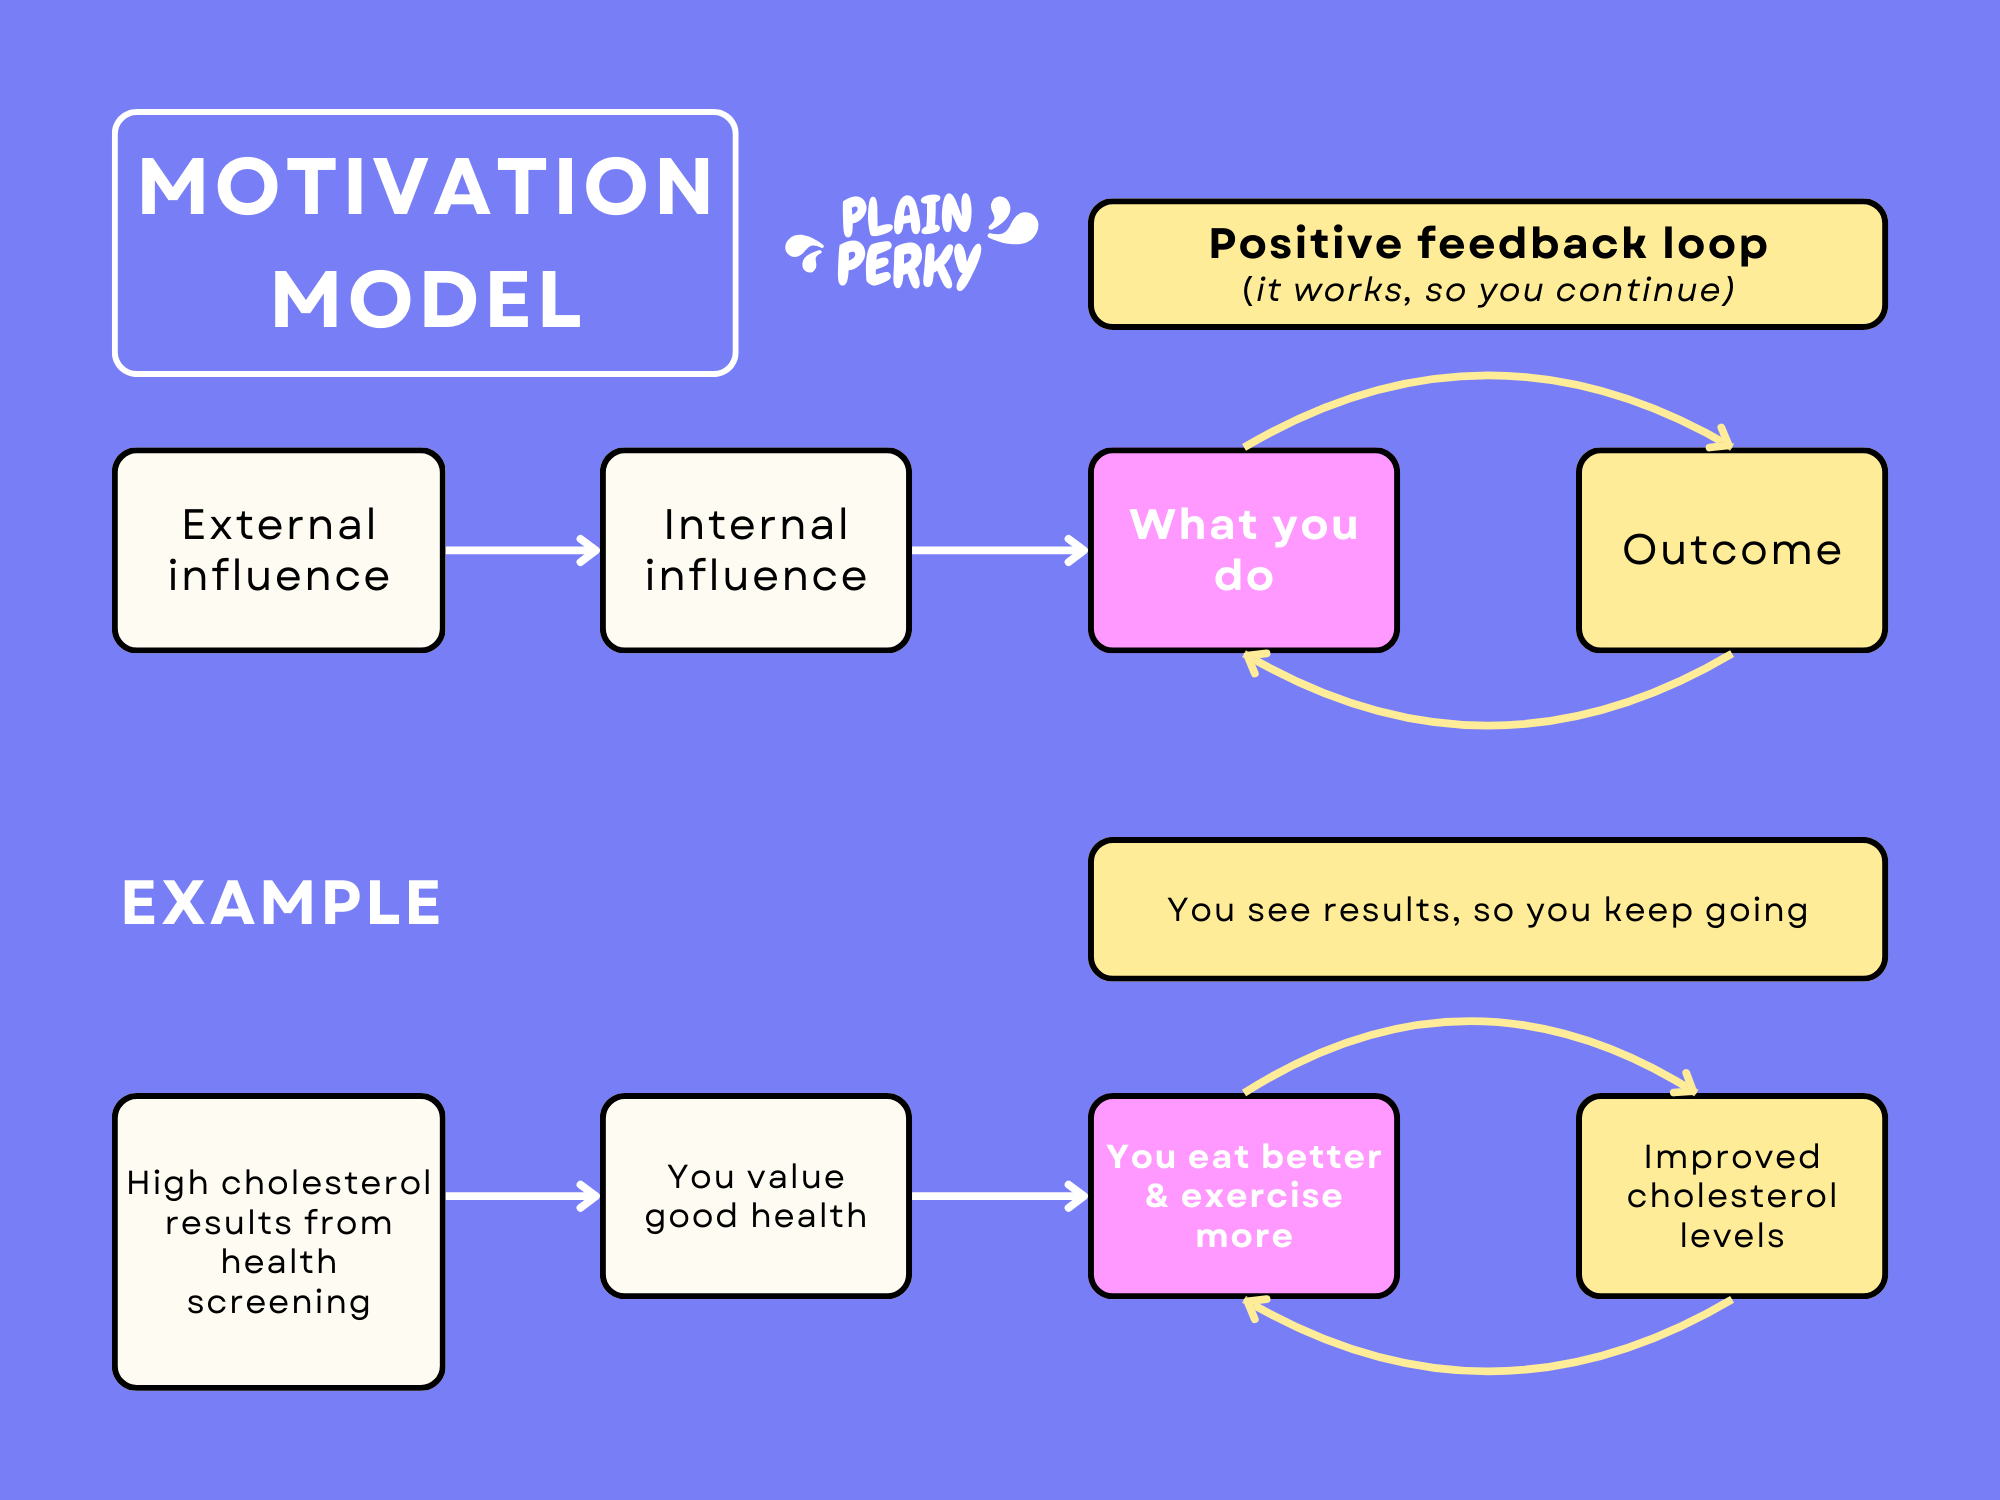 Motivation model with example